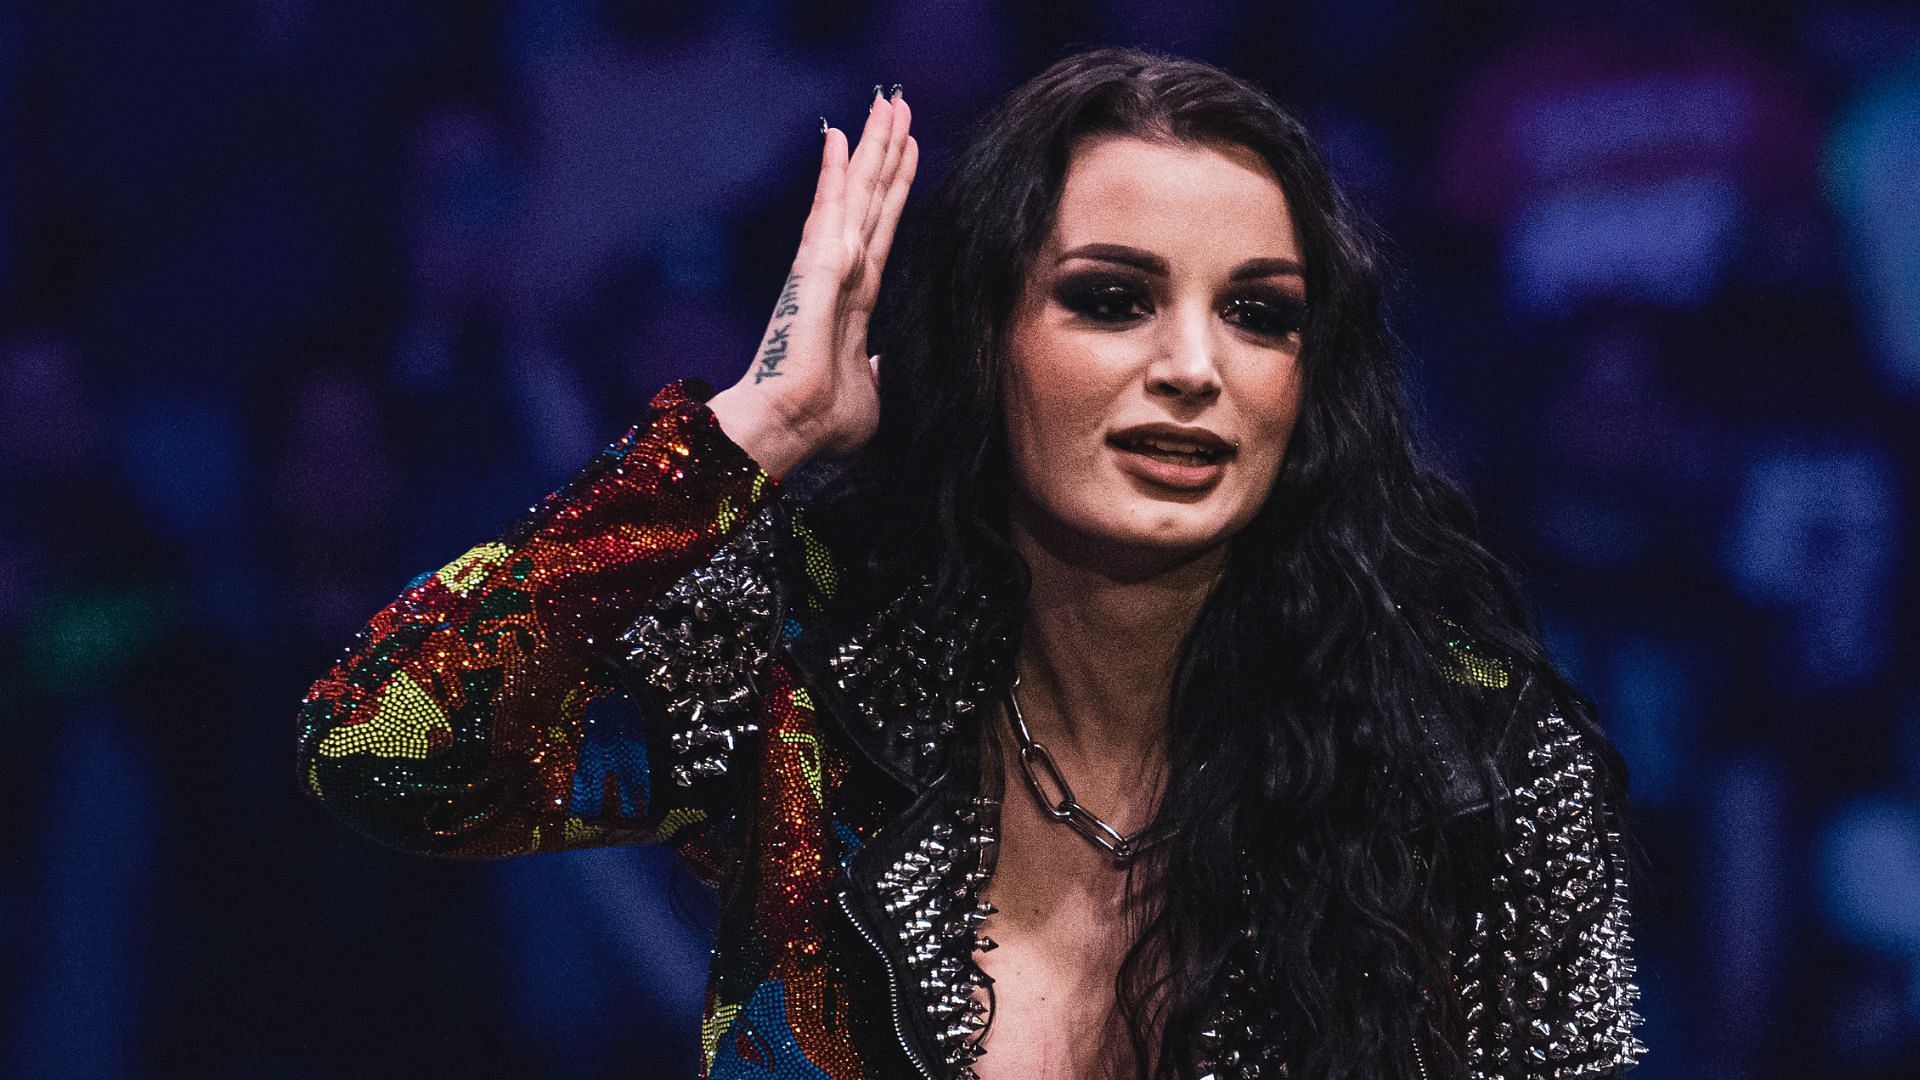 Saraya making her in-ring debut for AEW at Full Gear 2022